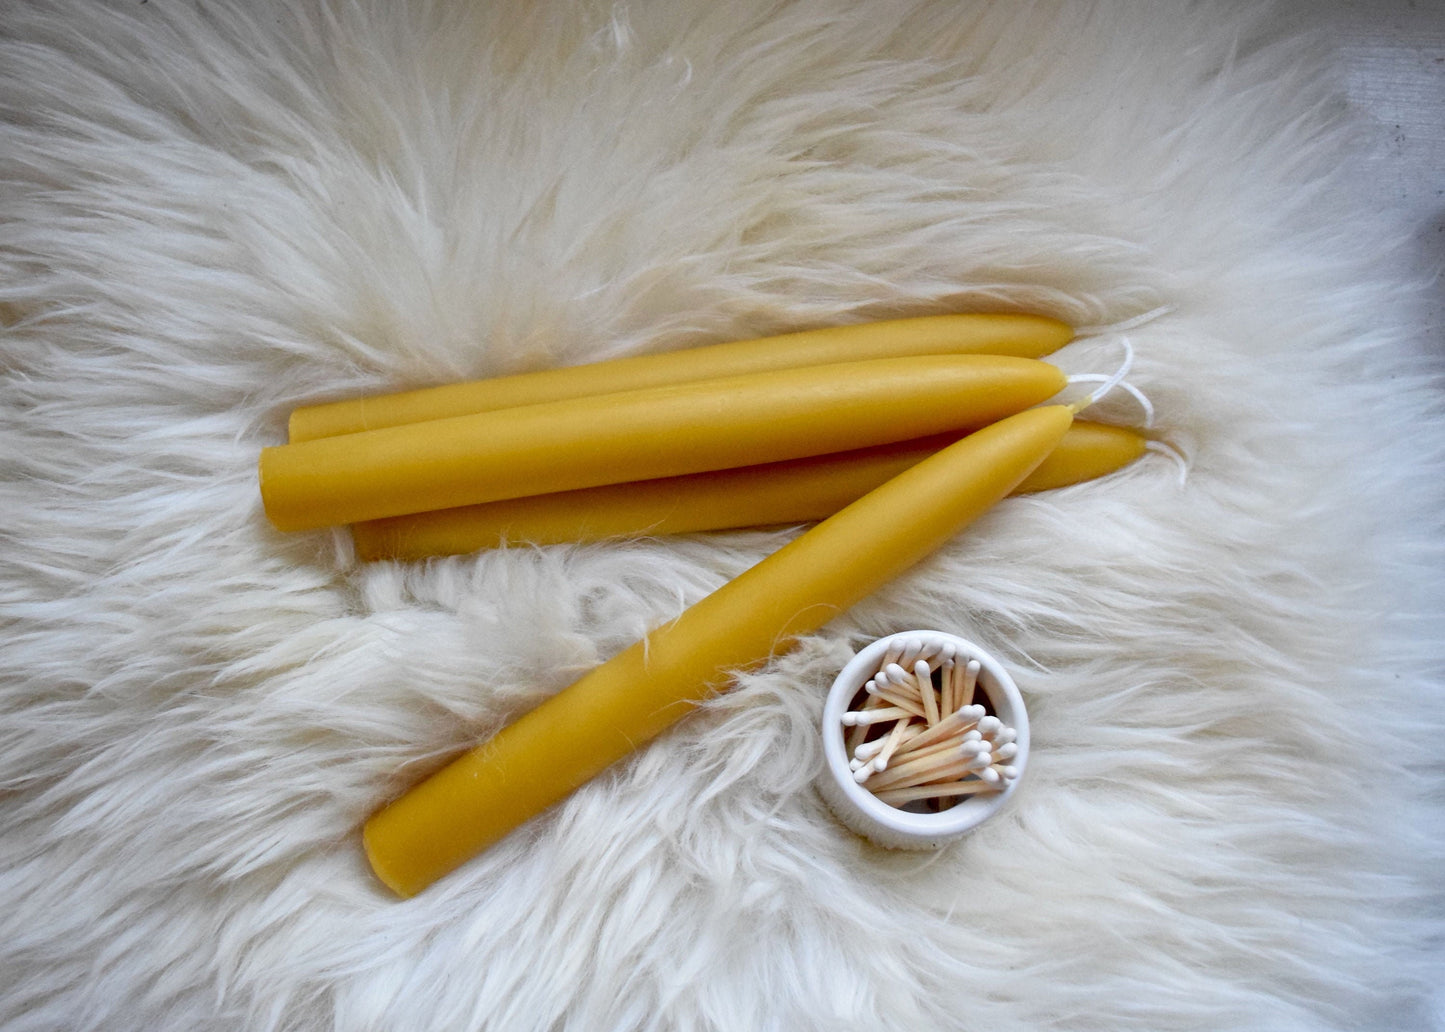 Pair of Two 8" Beeswax Taper Candles// Tapers, Beeswax, Candles // 100% Pure Handfiltered Beeswax, Hygge Home